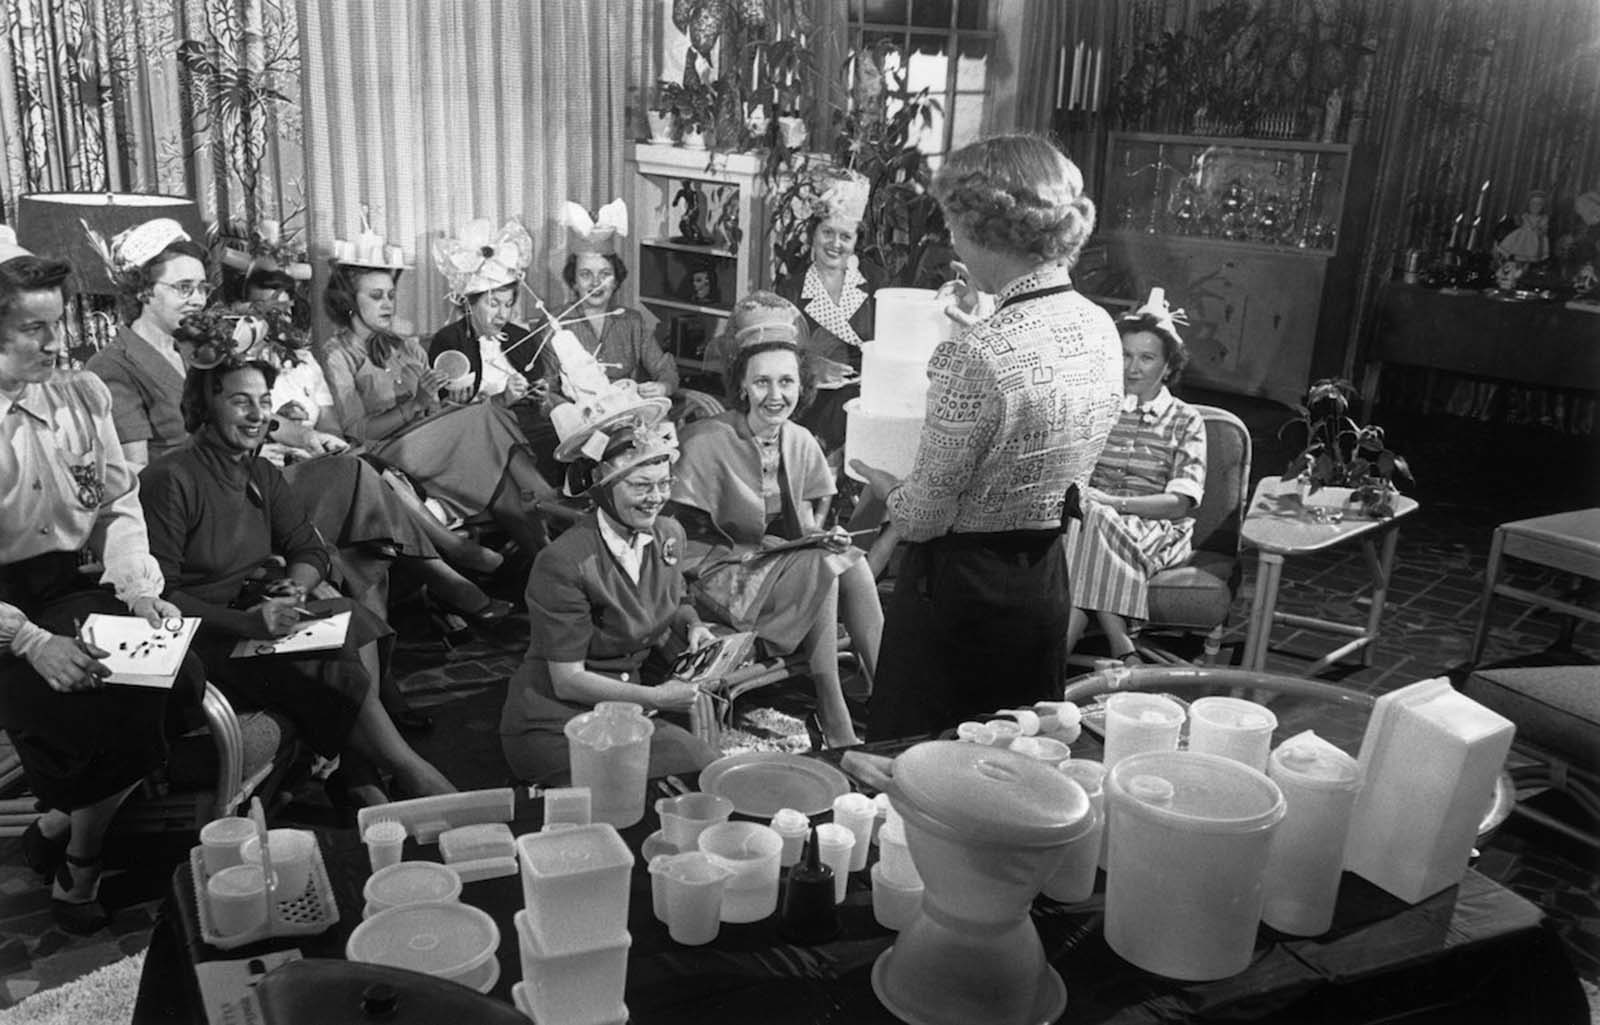 A Tupperware party in full swing. A table in the foreground displays a range of the company’s products. 1950s.